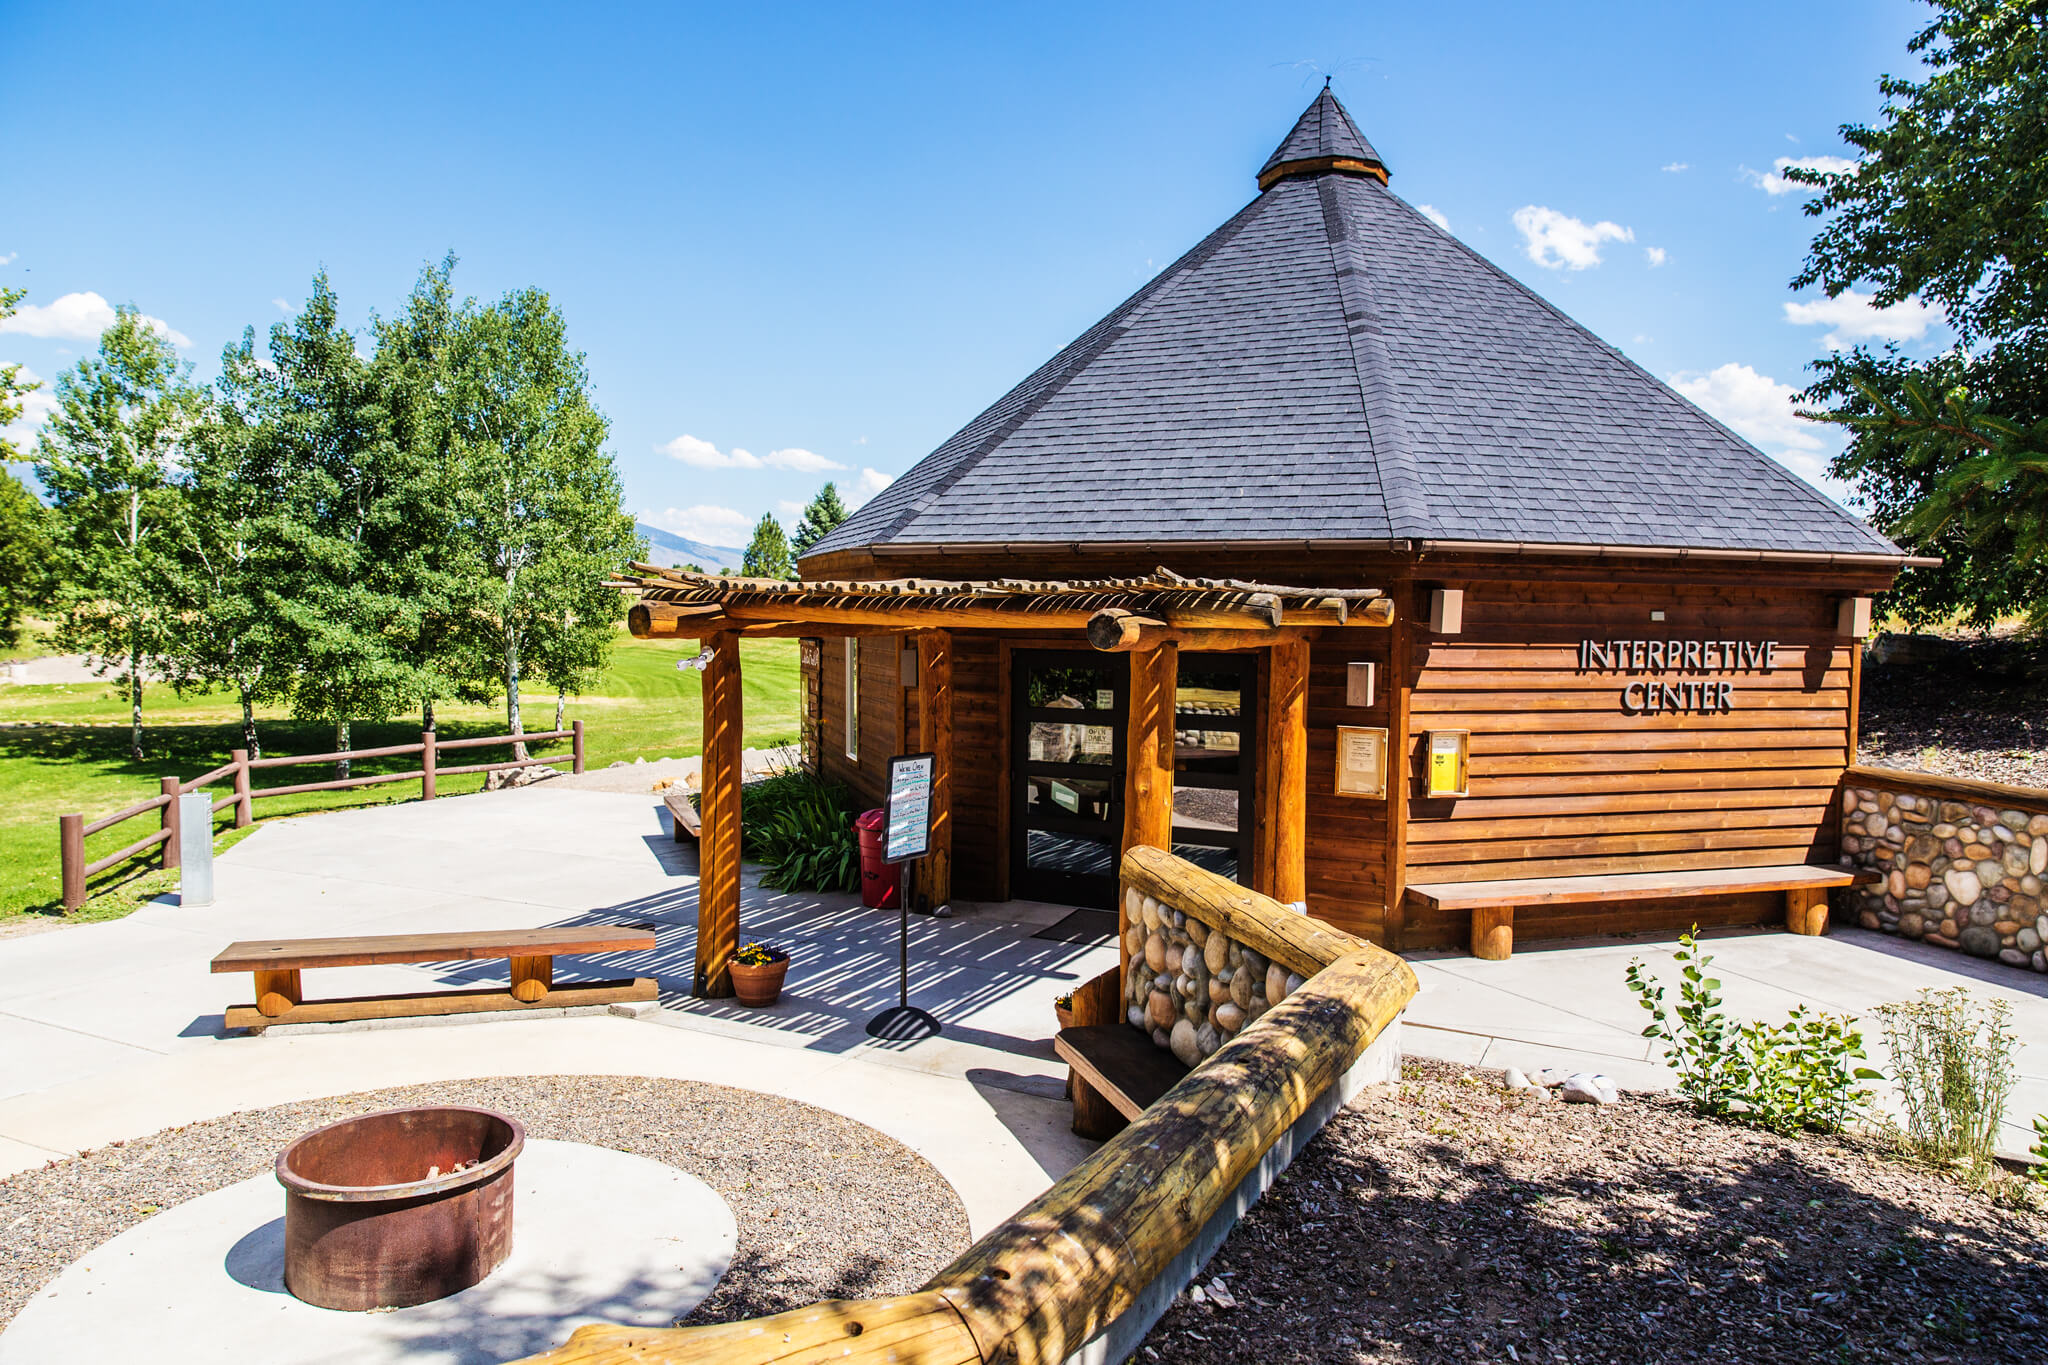 The exterior of the Sacajawea Interpretive, Cultural, and Educational Center and an outdoor firepit area.